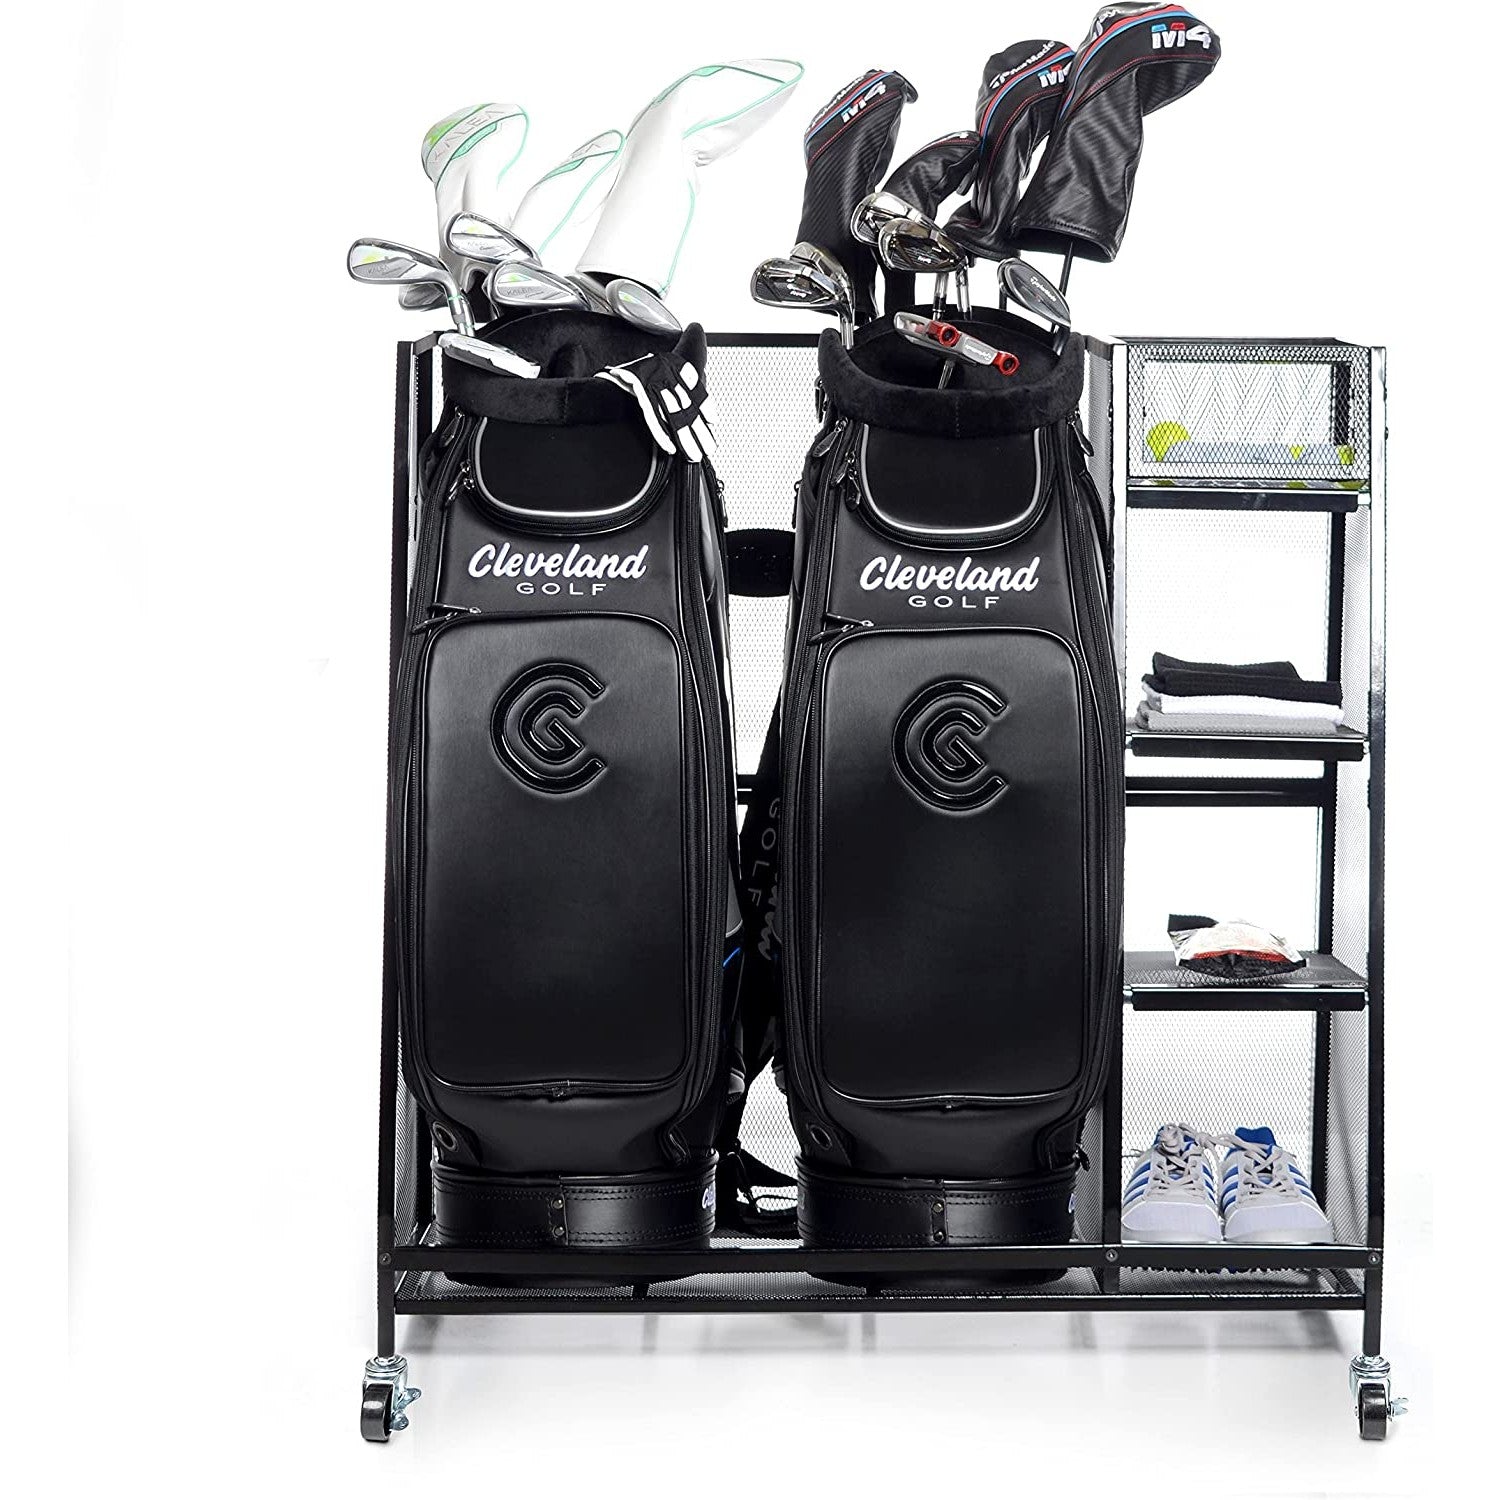 Take your golf game to the next level with this handy golf storage